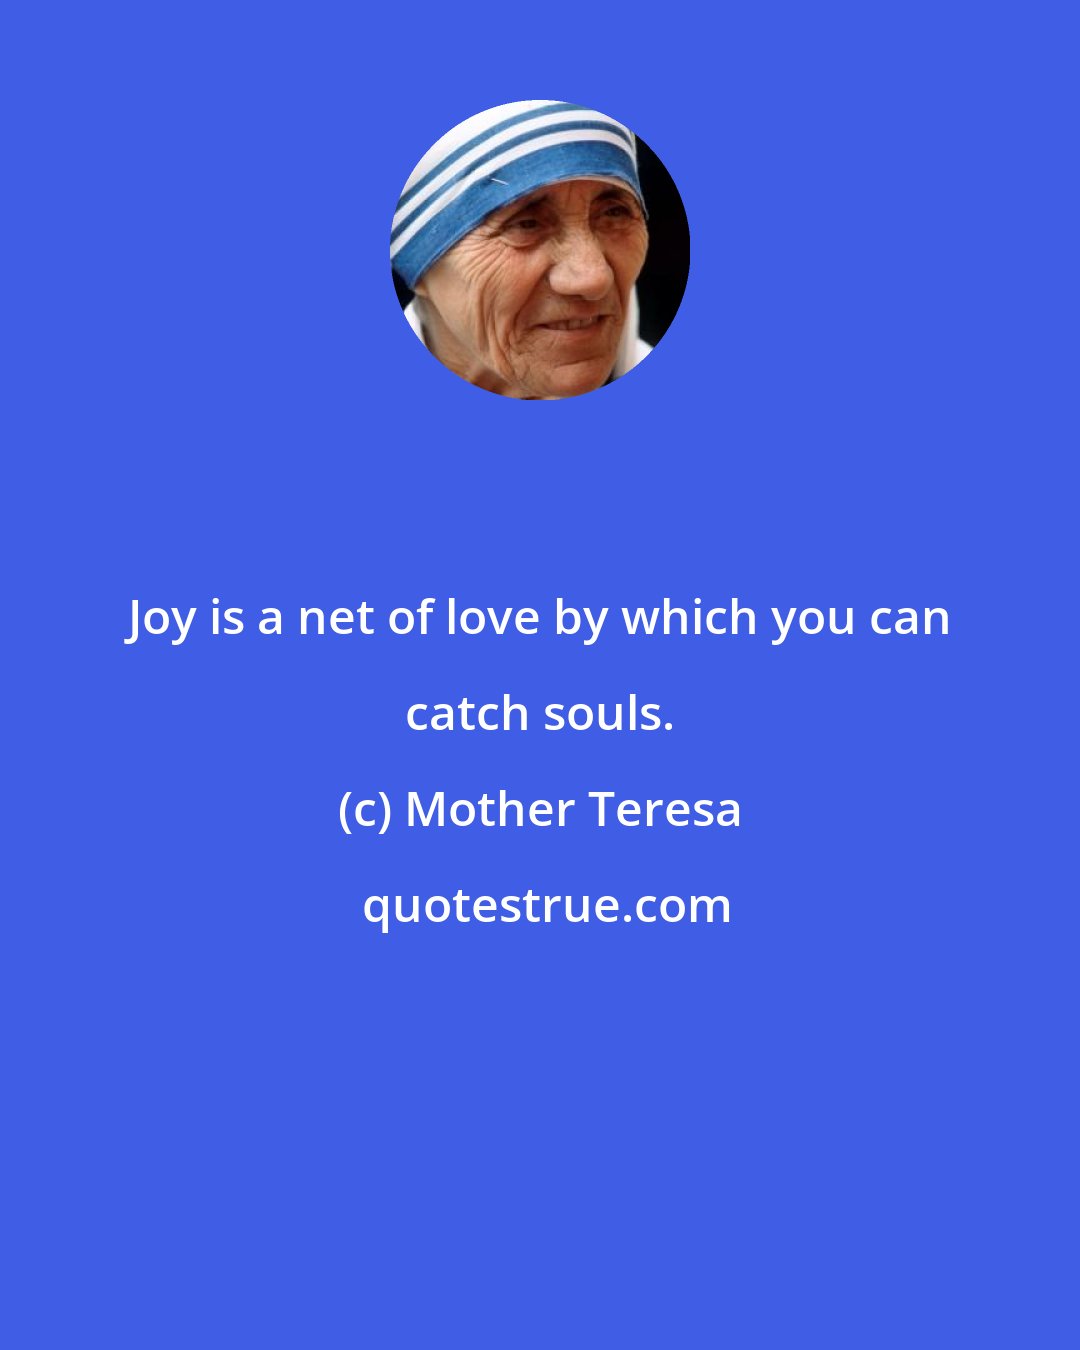 Mother Teresa: Joy is a net of love by which you can catch souls.